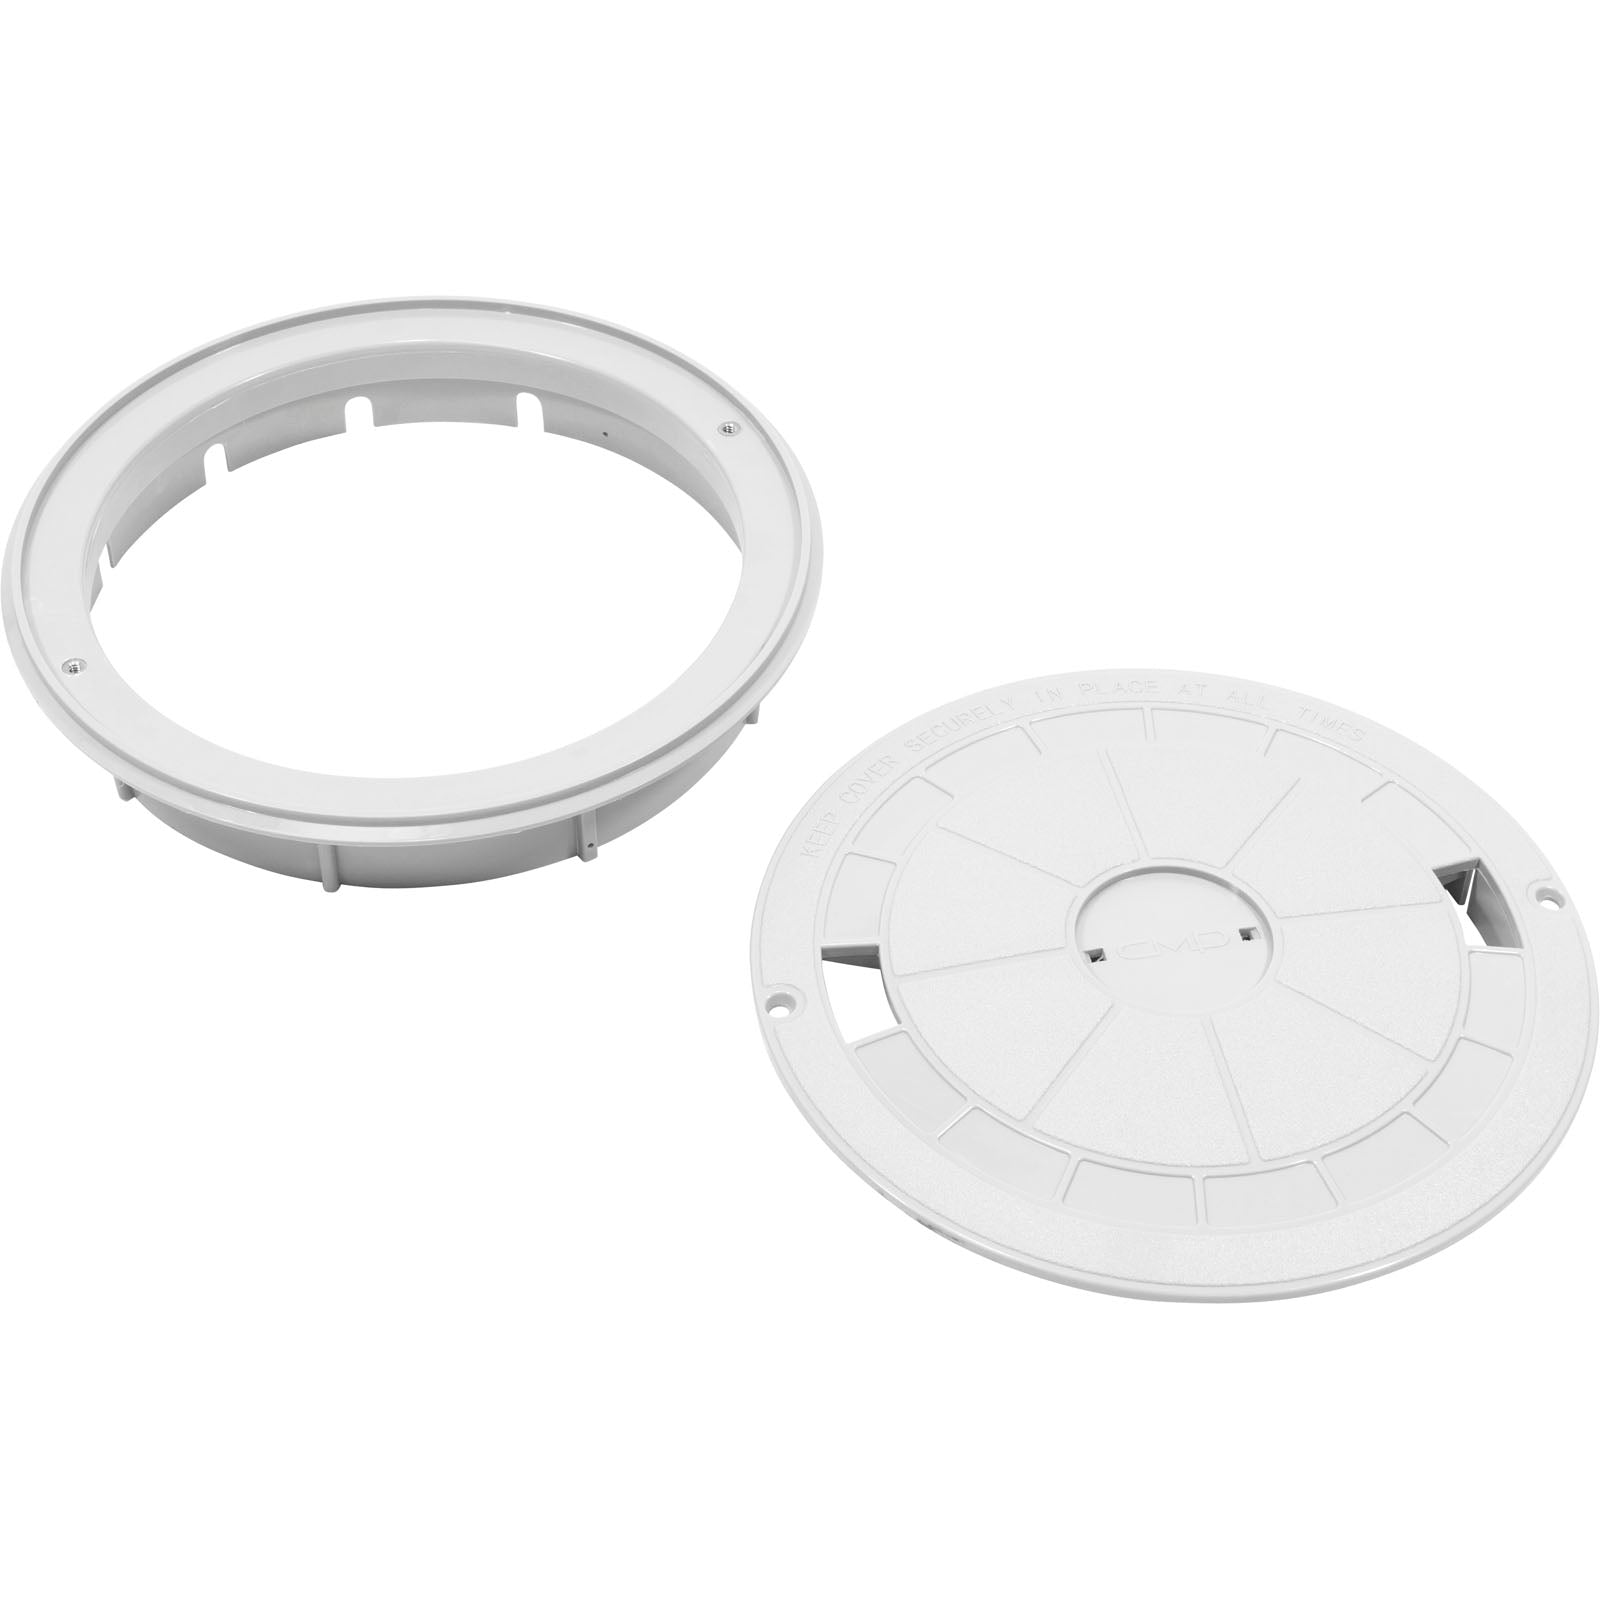 Skimmer Cover And Collar (Round) White/ 25544-900-000